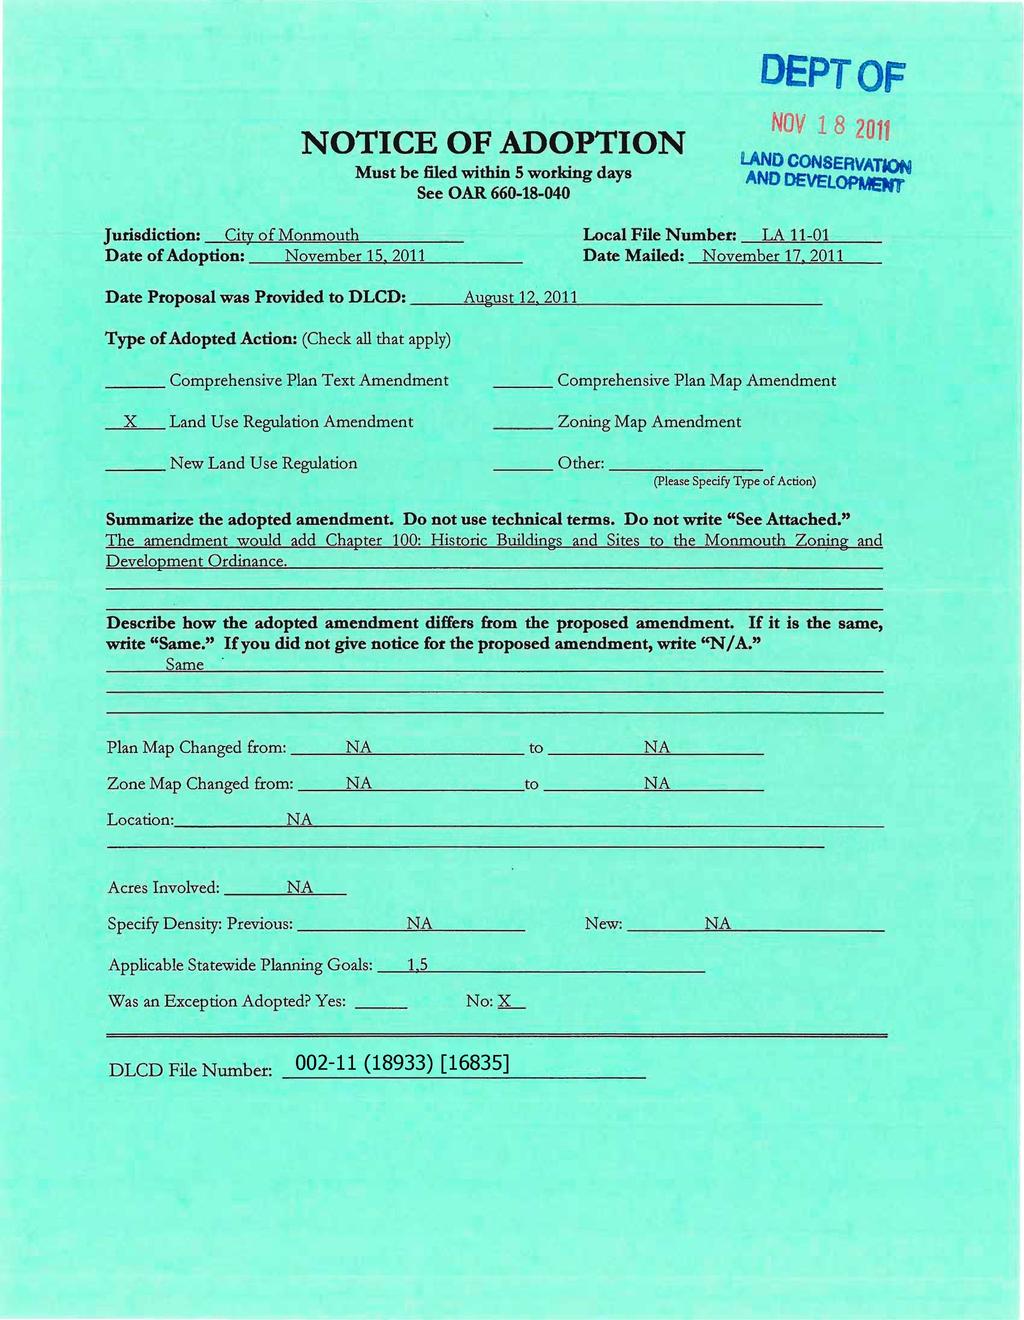 NOTICE OF ADOPTION Must be filed within 5 working days See OAR 660-18-040 DEPT OF NOV 1 8 2011 UNO CONSERVATION ANO DEVELOPMENT Jurisdiction: City of Monmouth Local File Number: LA 11-01 Date of